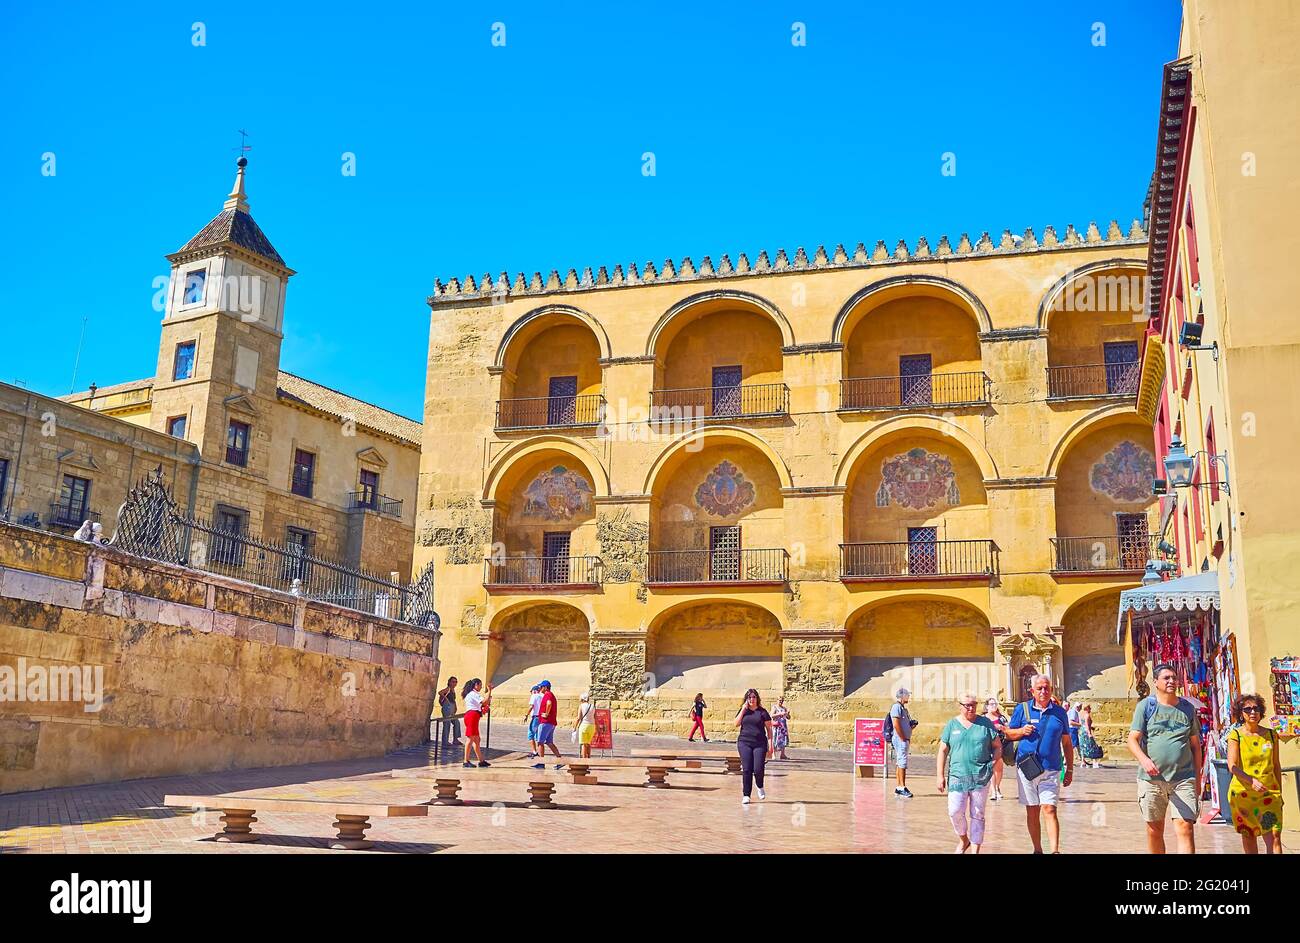 CORDOBA, SPAIN - SEPTEMBER 30, 2019: Walk Triumph Square and enjoy the view of medieval wall of Mezquita, decorated with niches and coats of arms, on Stock Photo